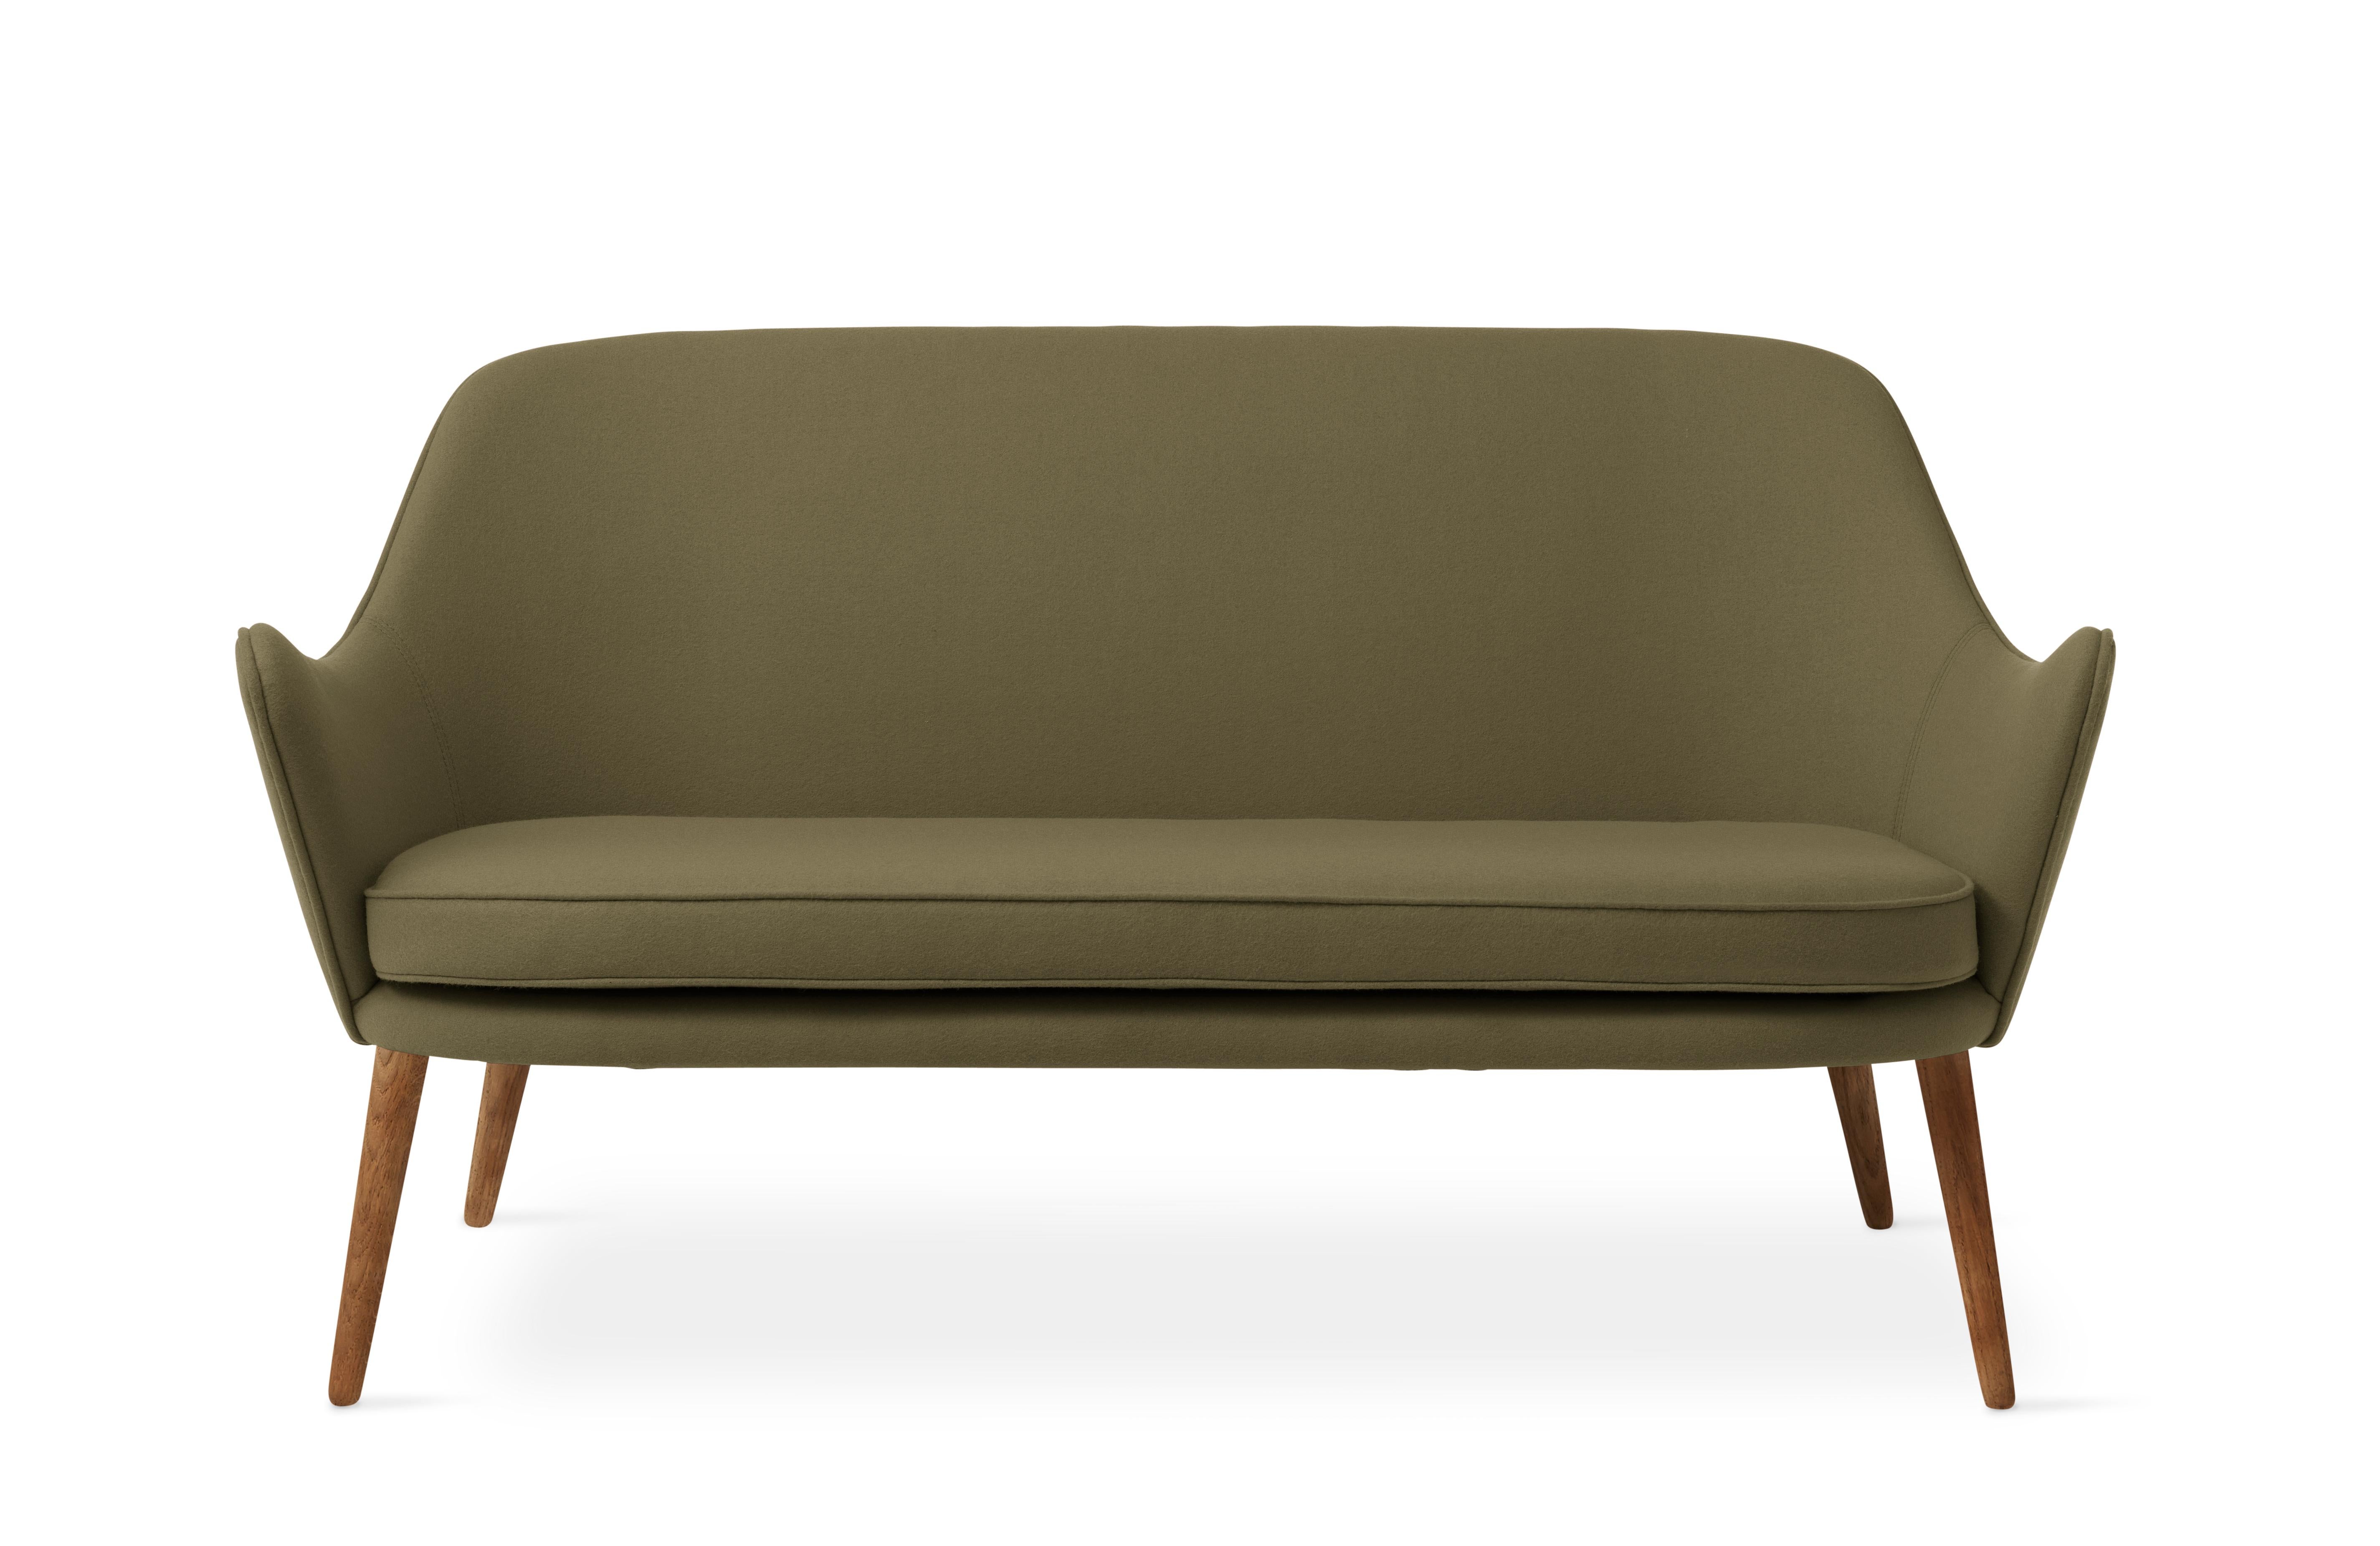 En vente : Green (Hero 981) Canapé 2 places Dwellings, by Hans Olsen from Warm Nordic